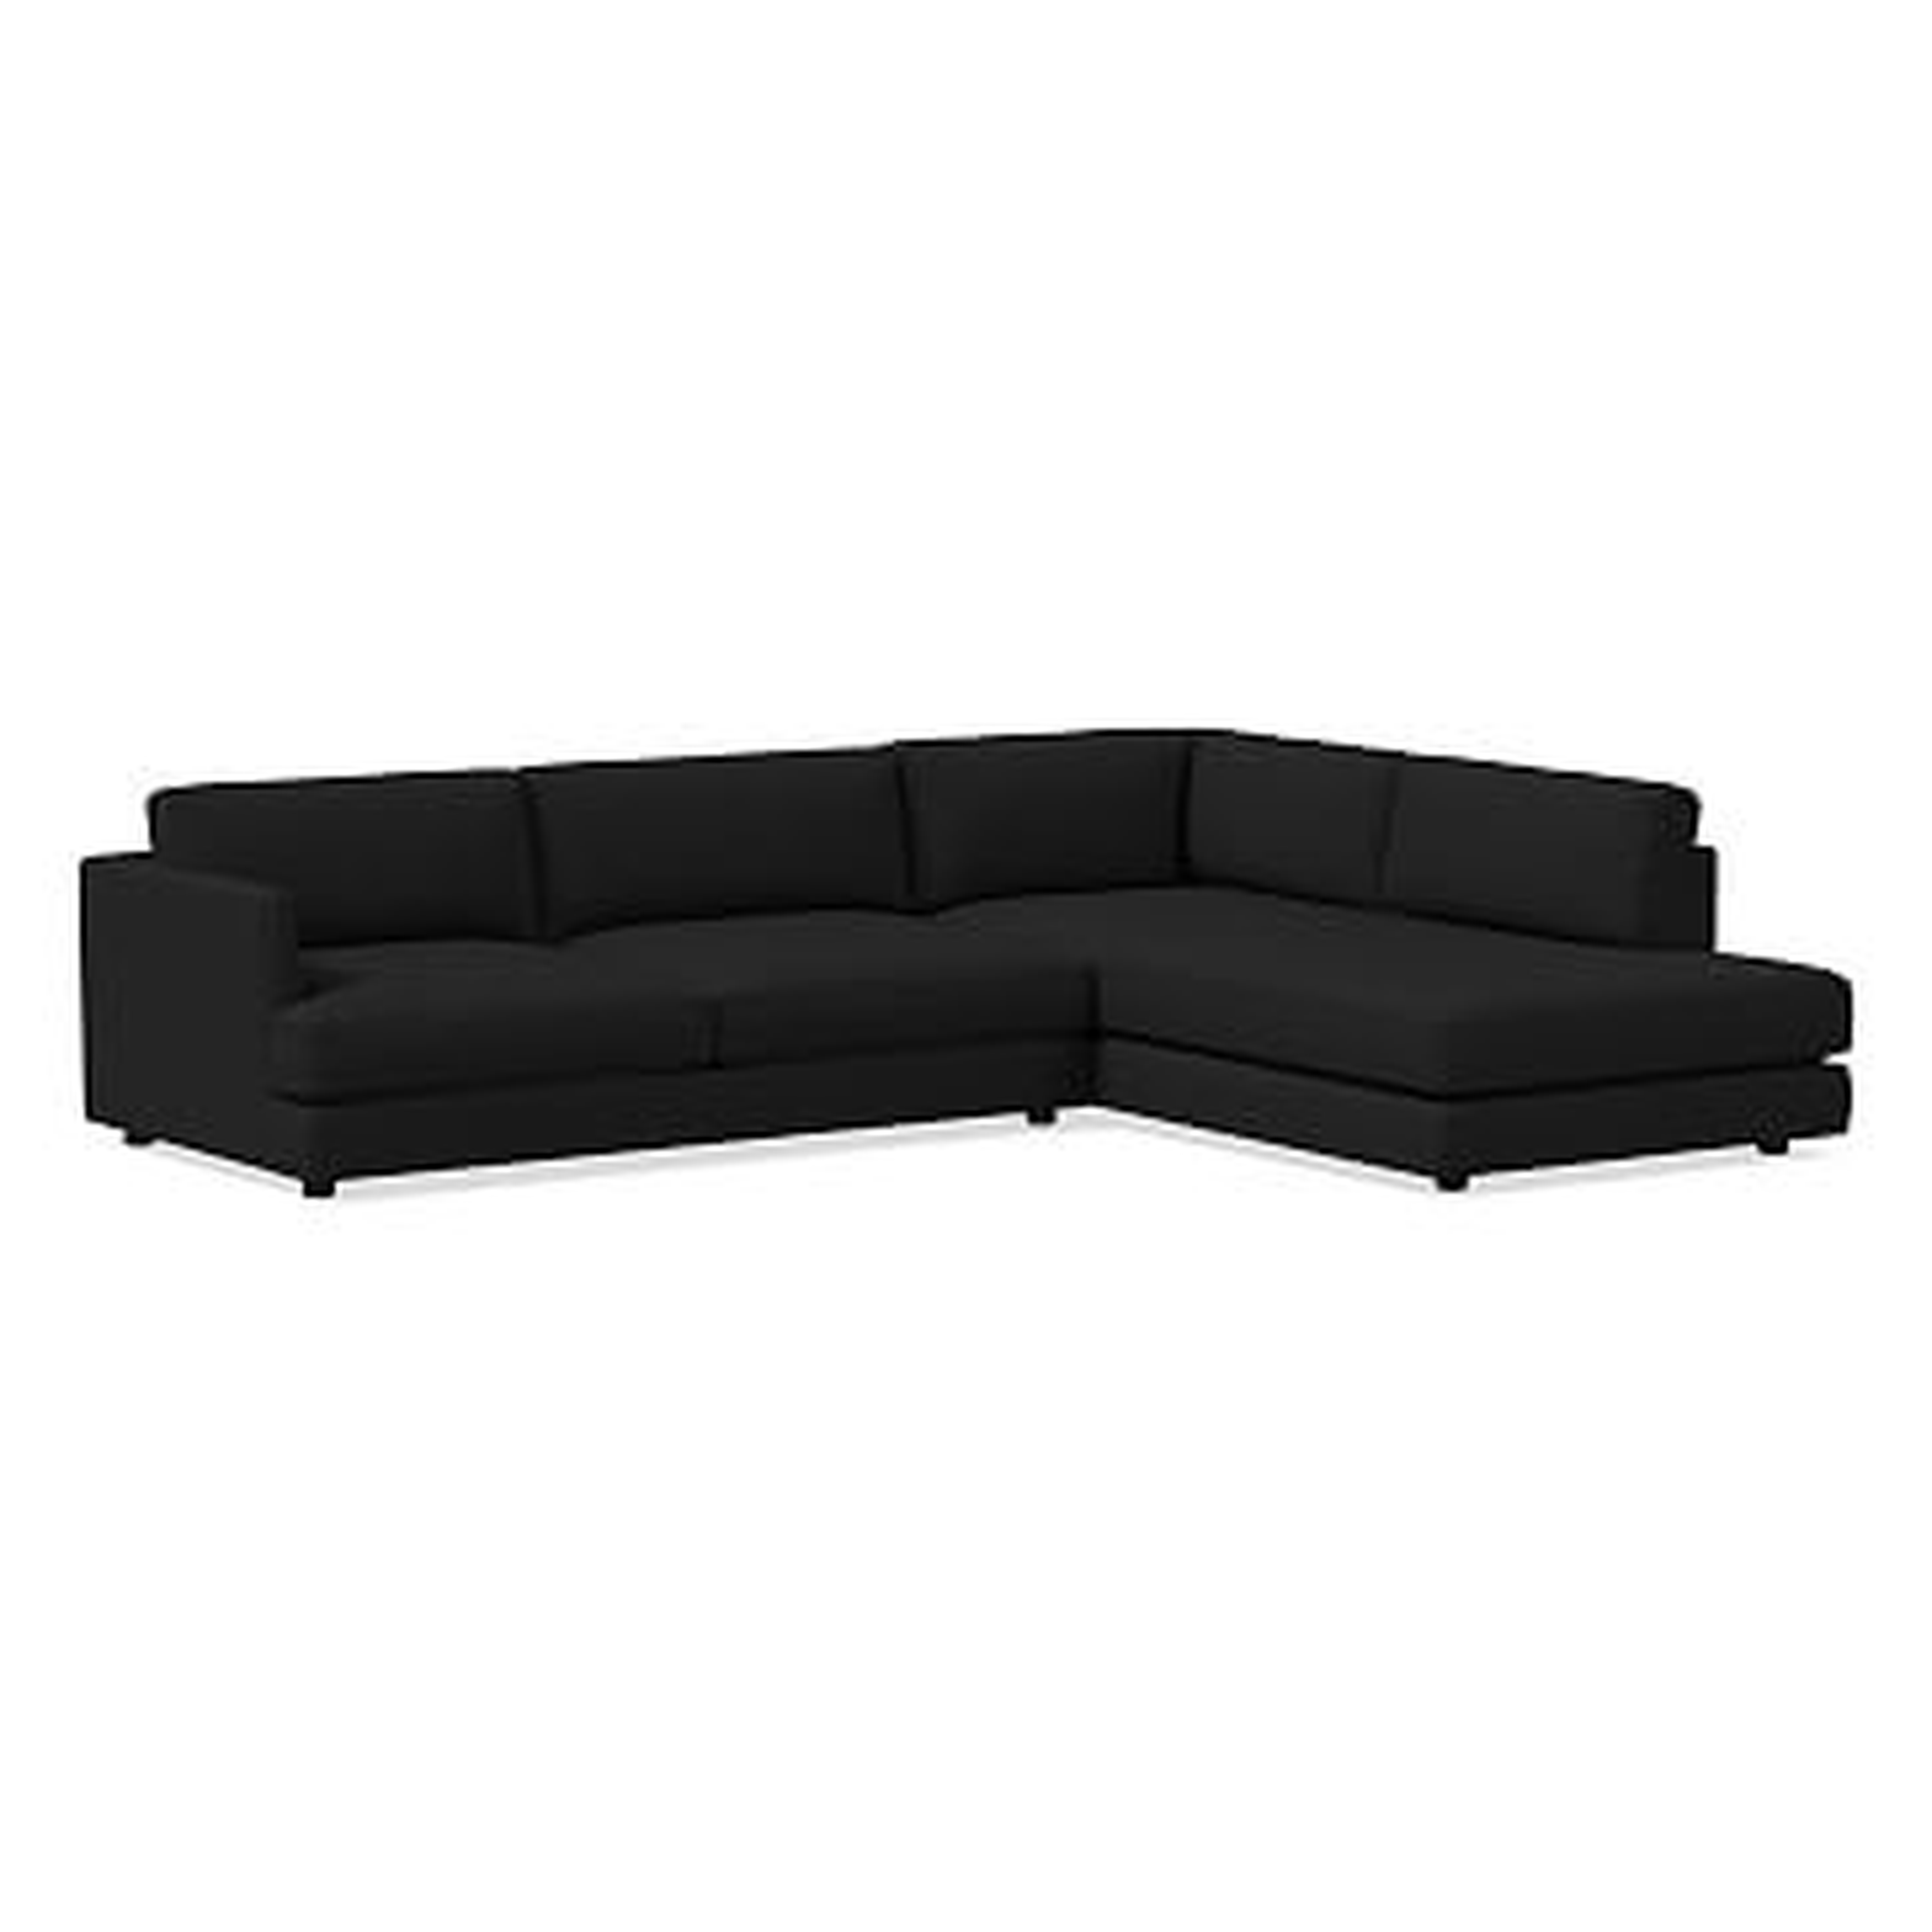 Haven Sectional Set 05: XL Left Arm Sofa, Right Arm Terminal Chaise, Poly, Chunky Basketweave, Charcoal - West Elm